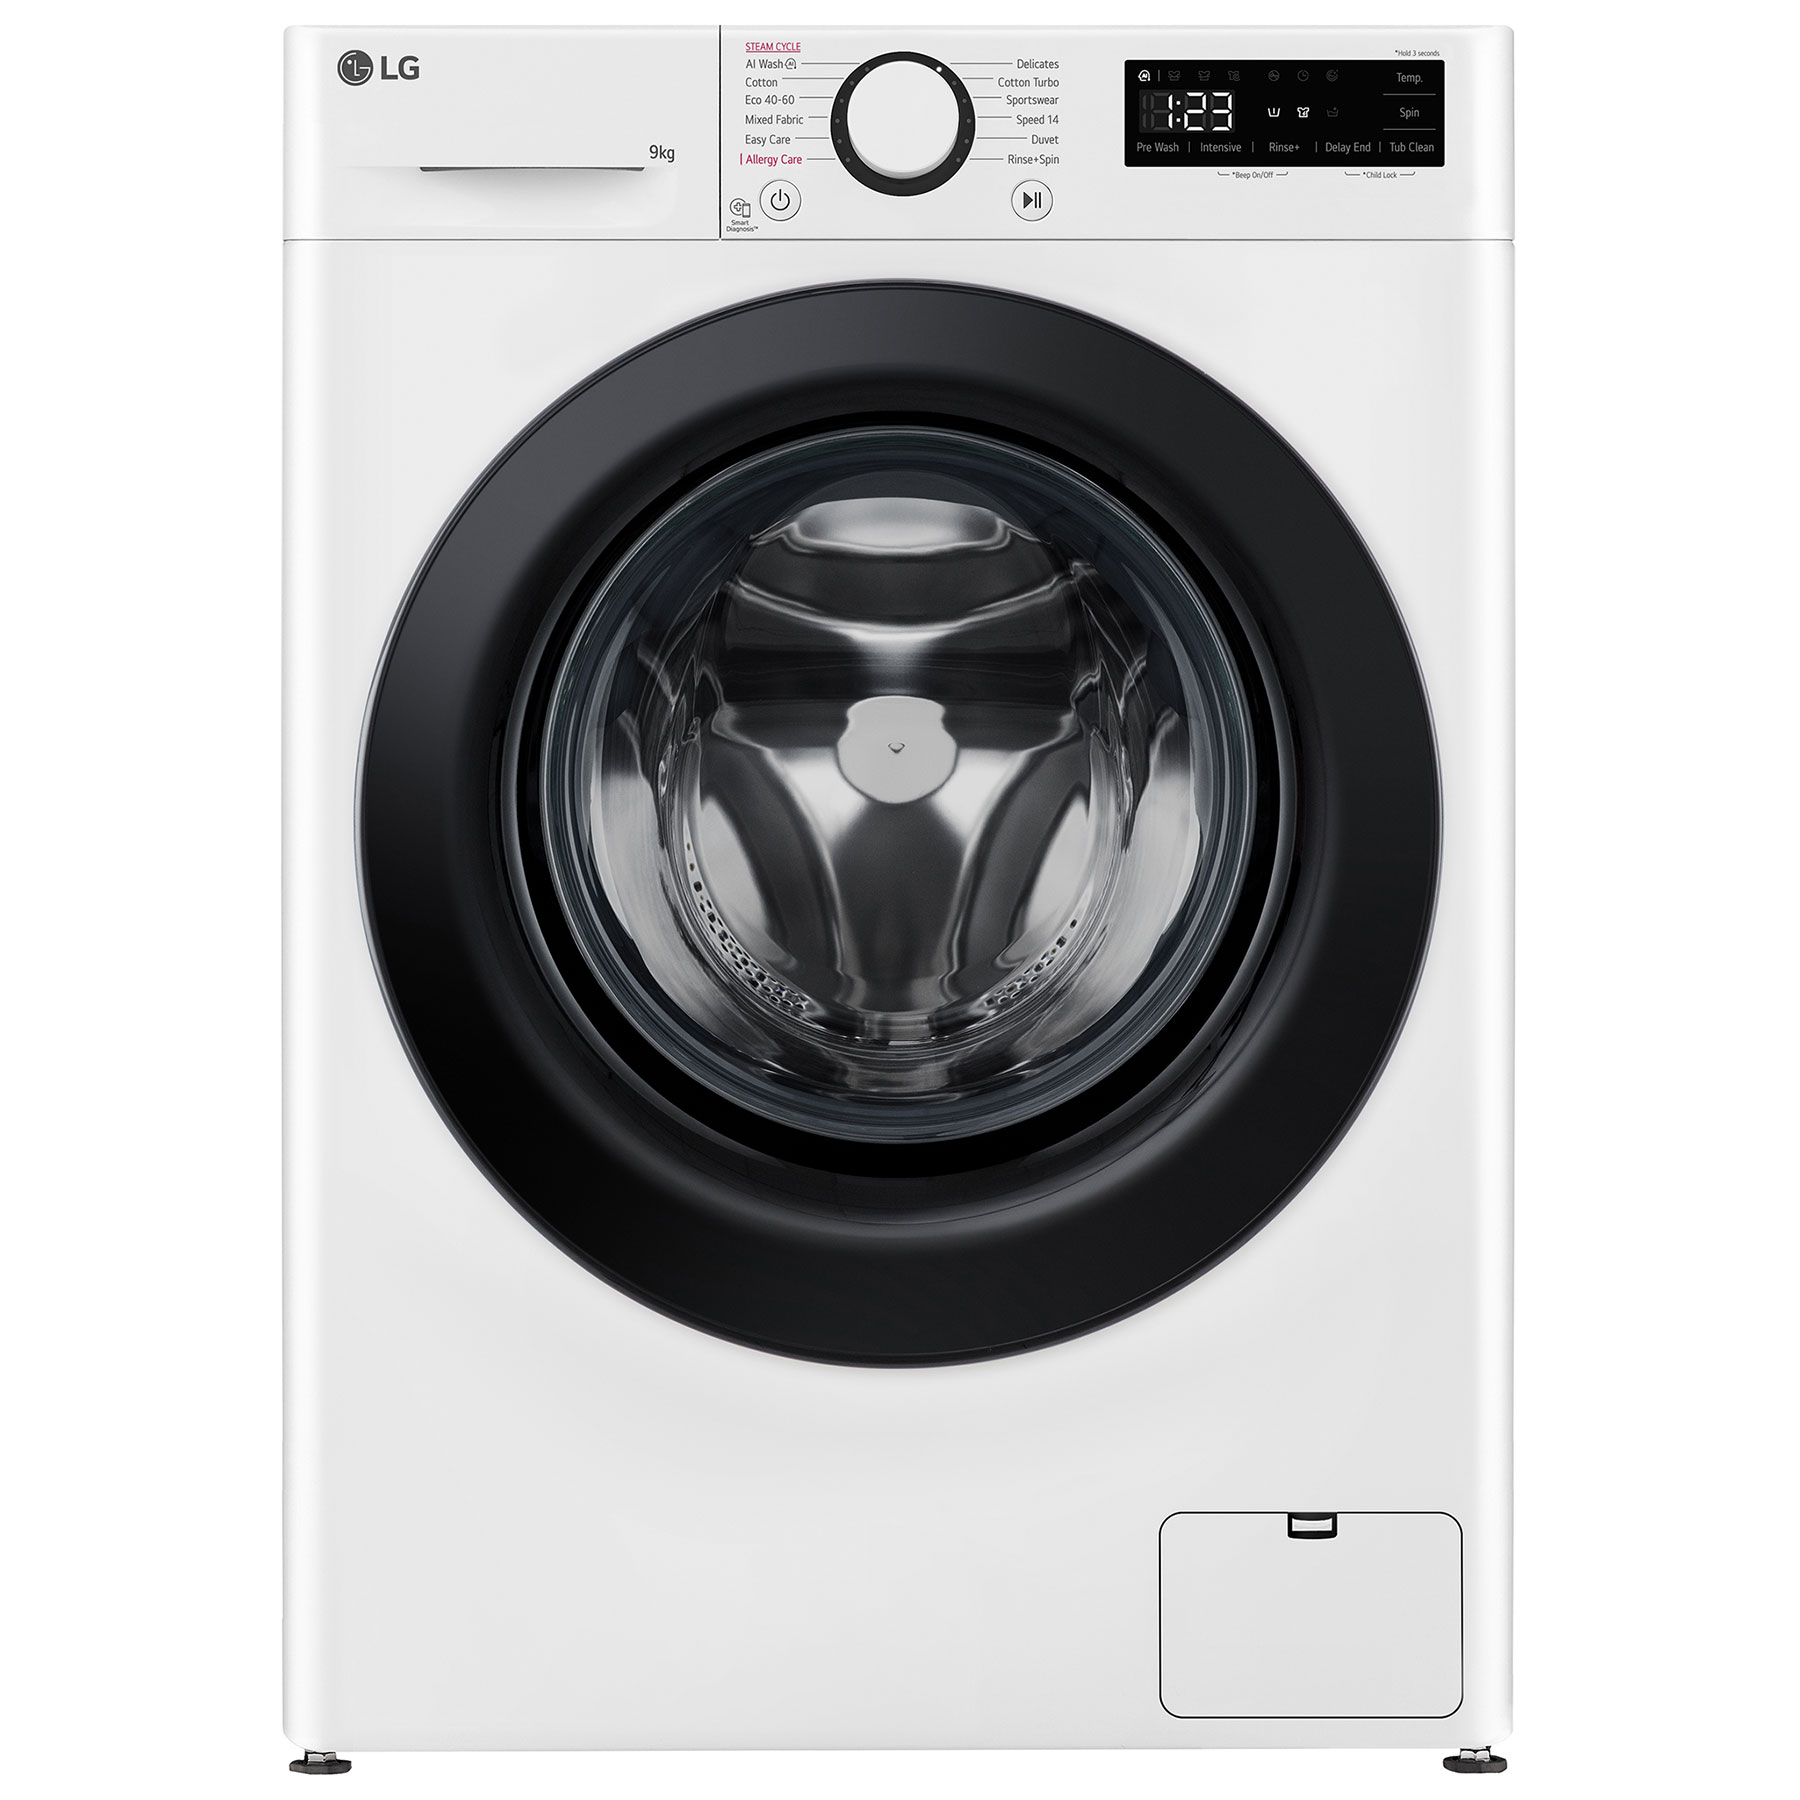 Image of LG F2Y509WBLN1 Washing Machine in White 1200rpm 9kg A Rated